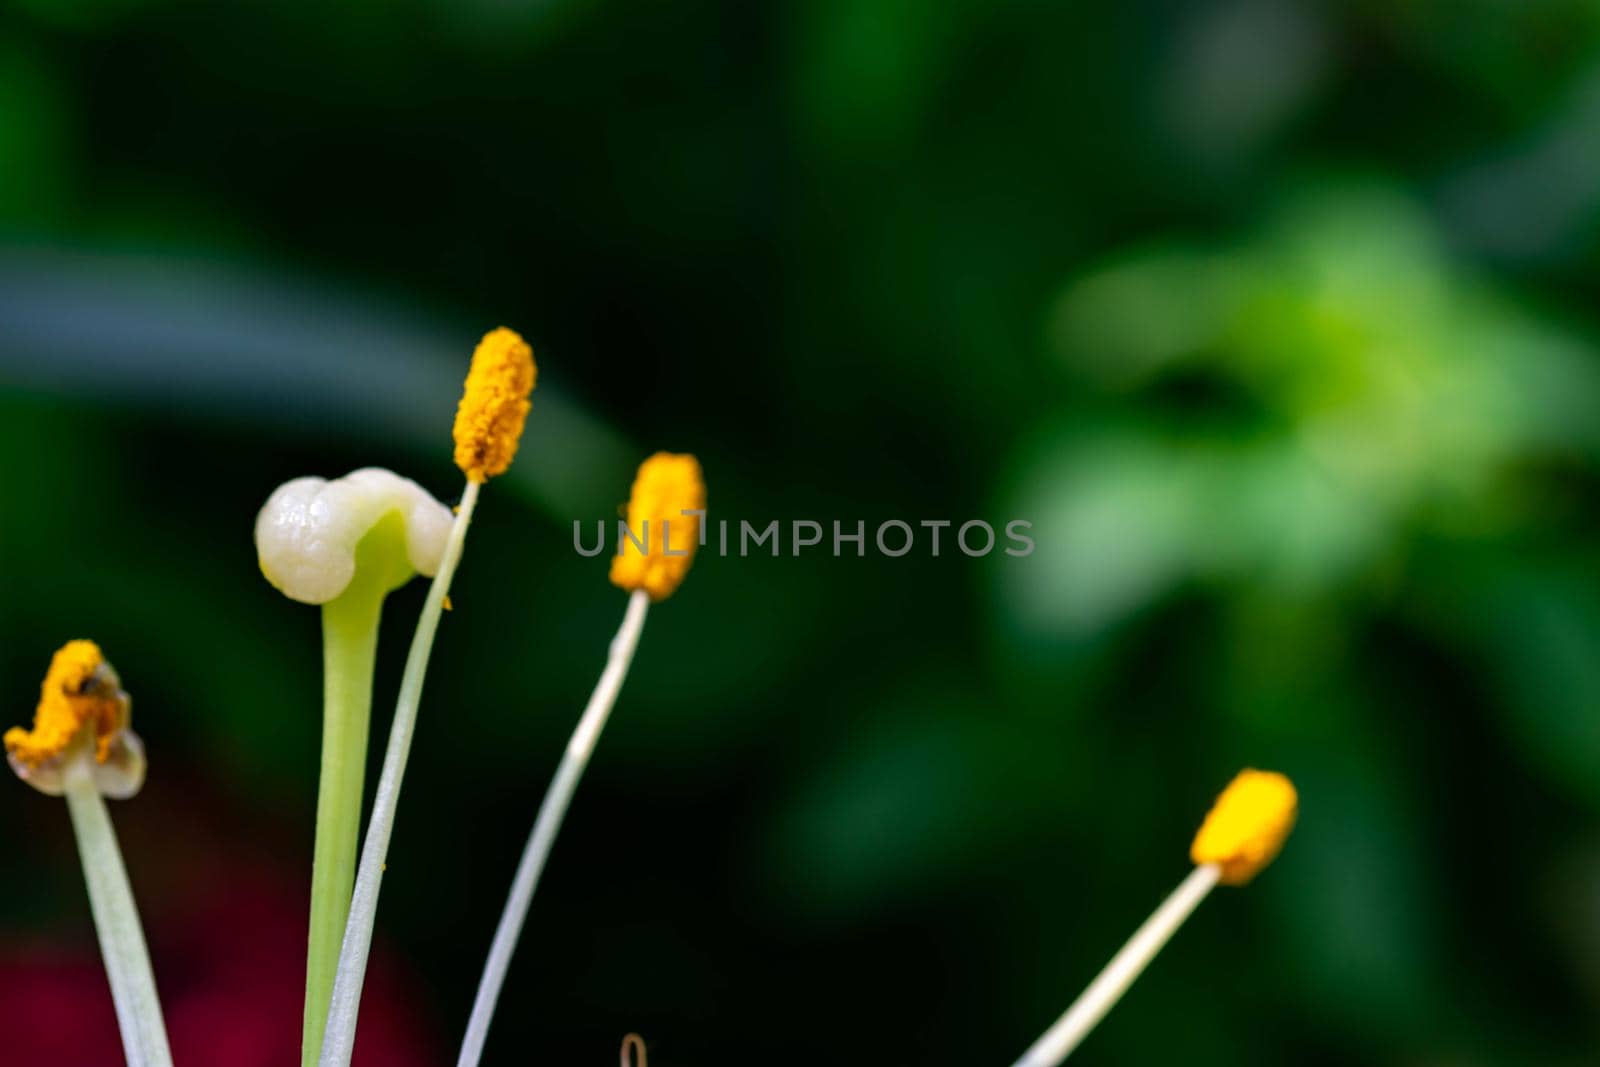 Horizontal full lenght blurry shot of small yellow flowers with soft  blurry  background image